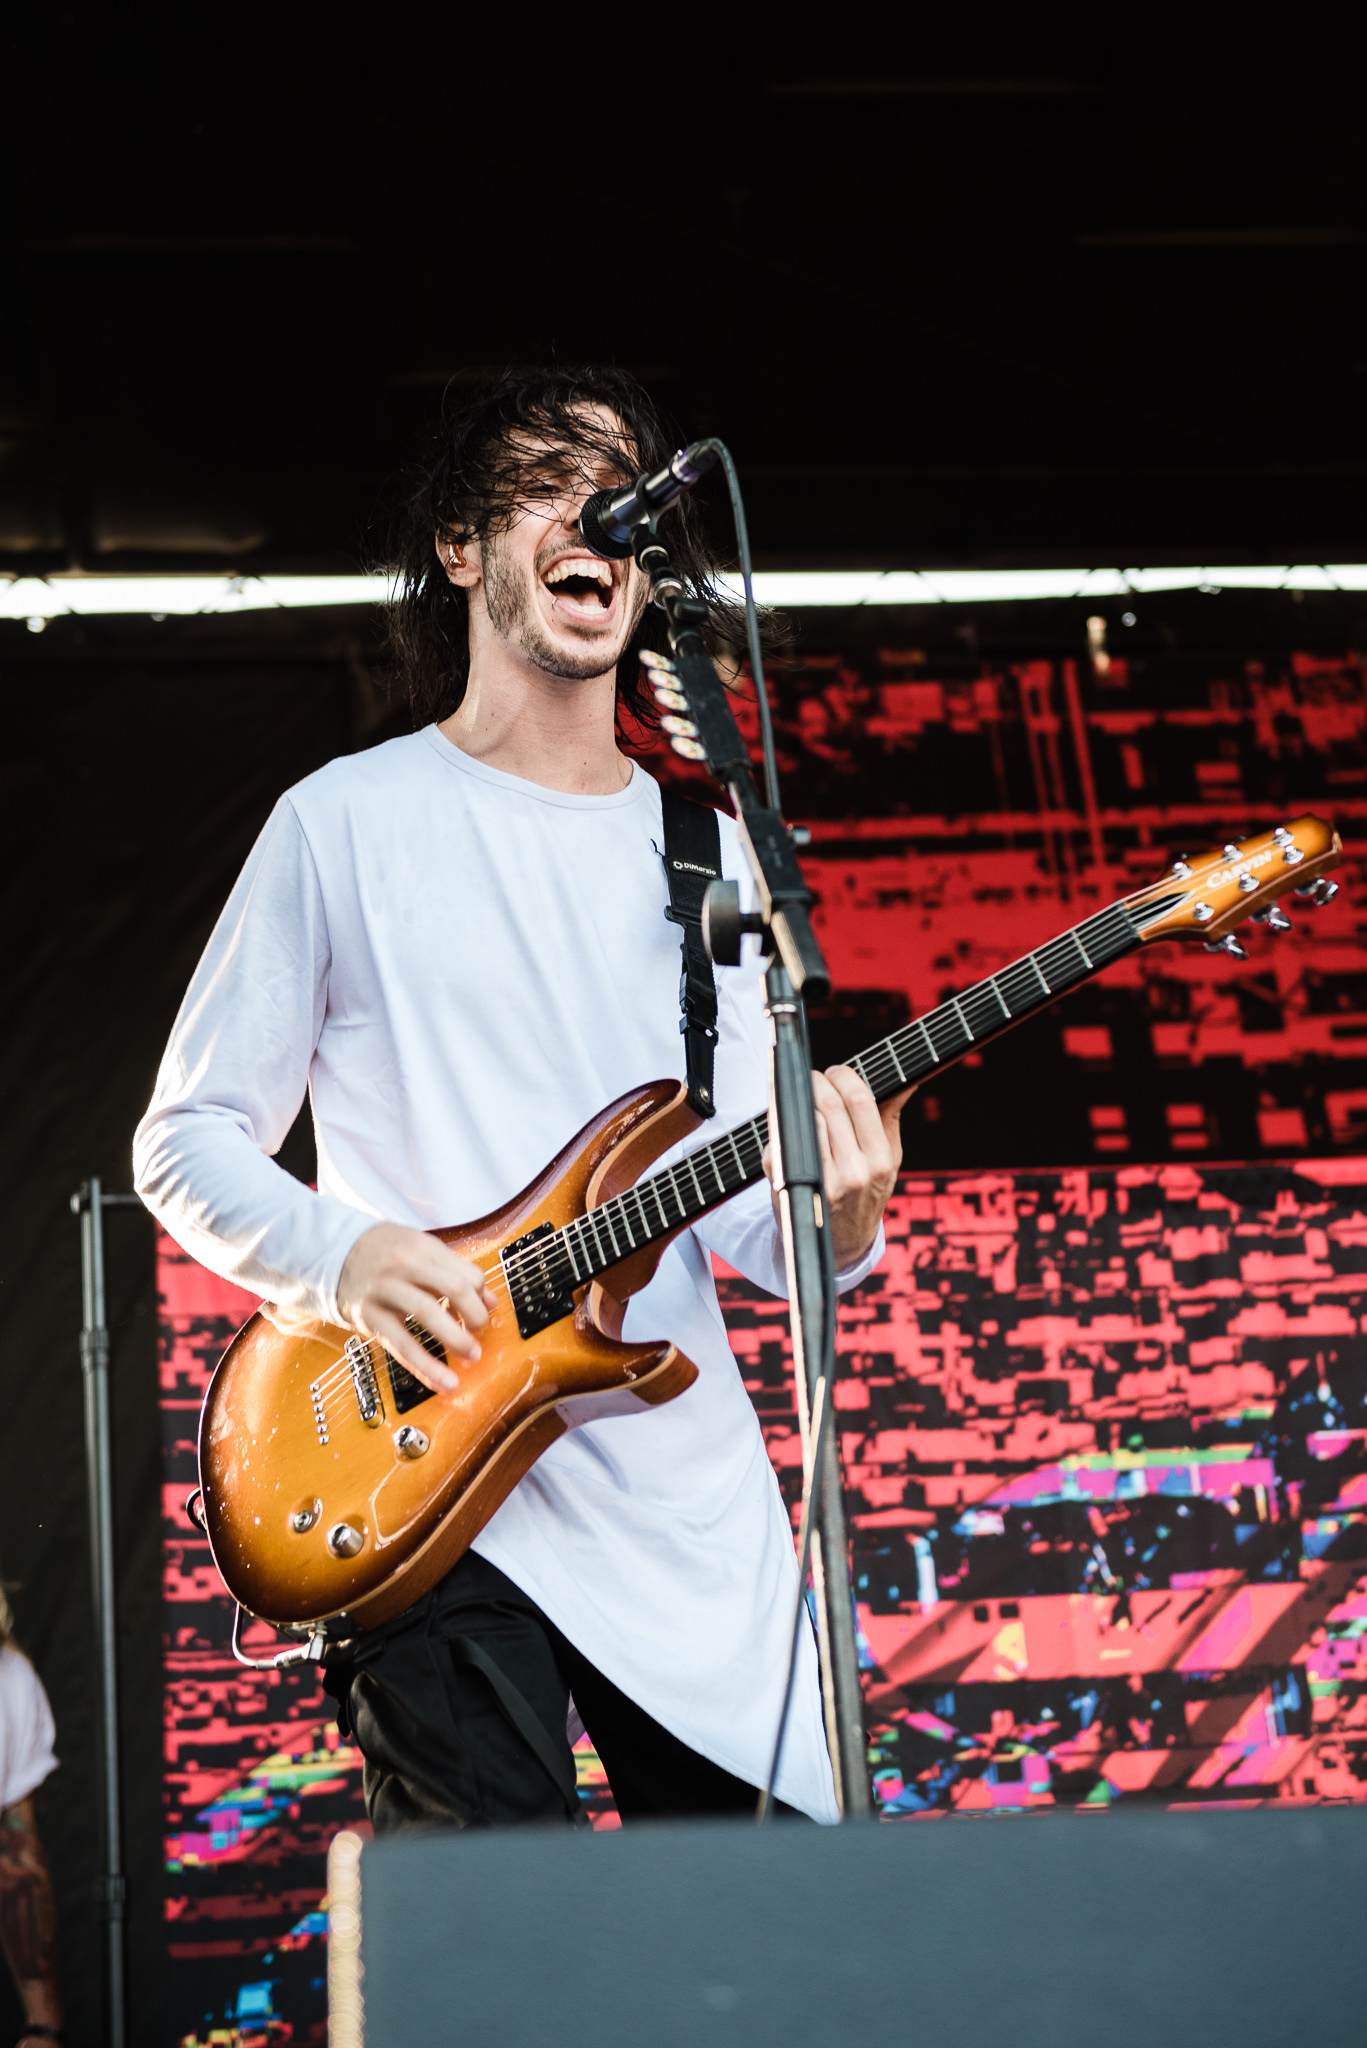 Crown the Empire Warped Tour 2018 PNC Bank Arts Center Holmdel NJ Stars and Scars Photo